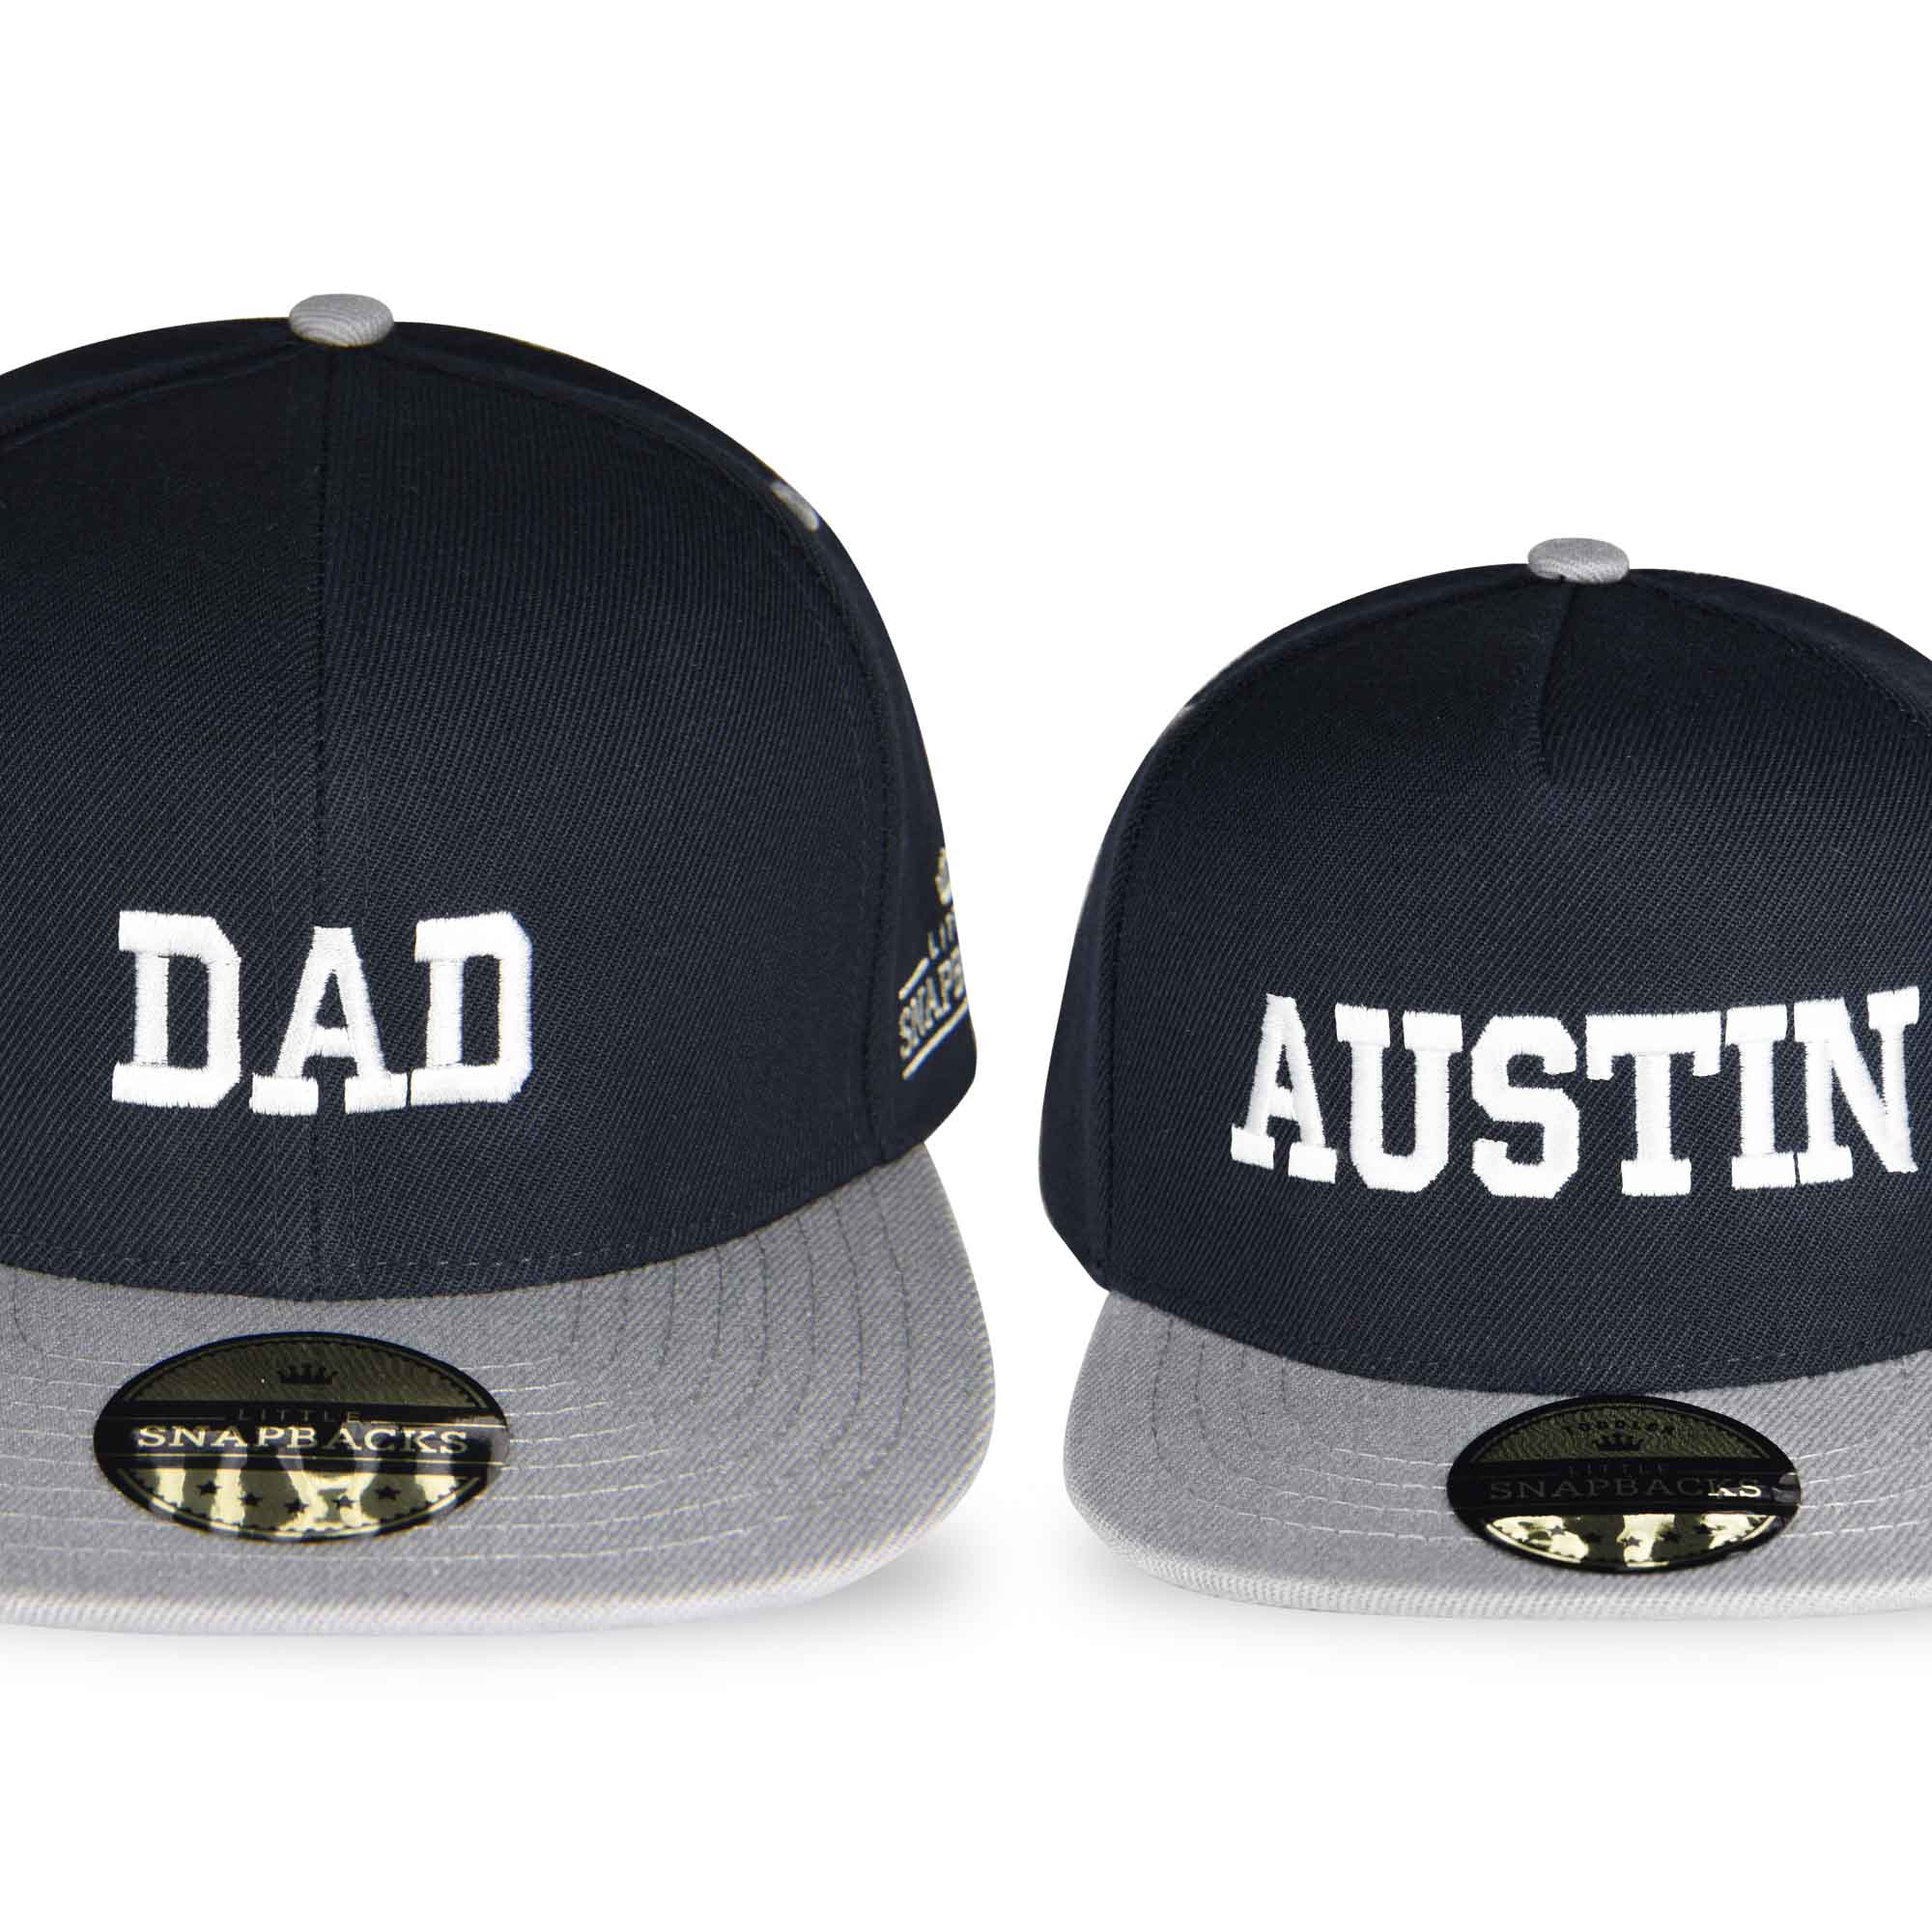 Matching Father's Day Range